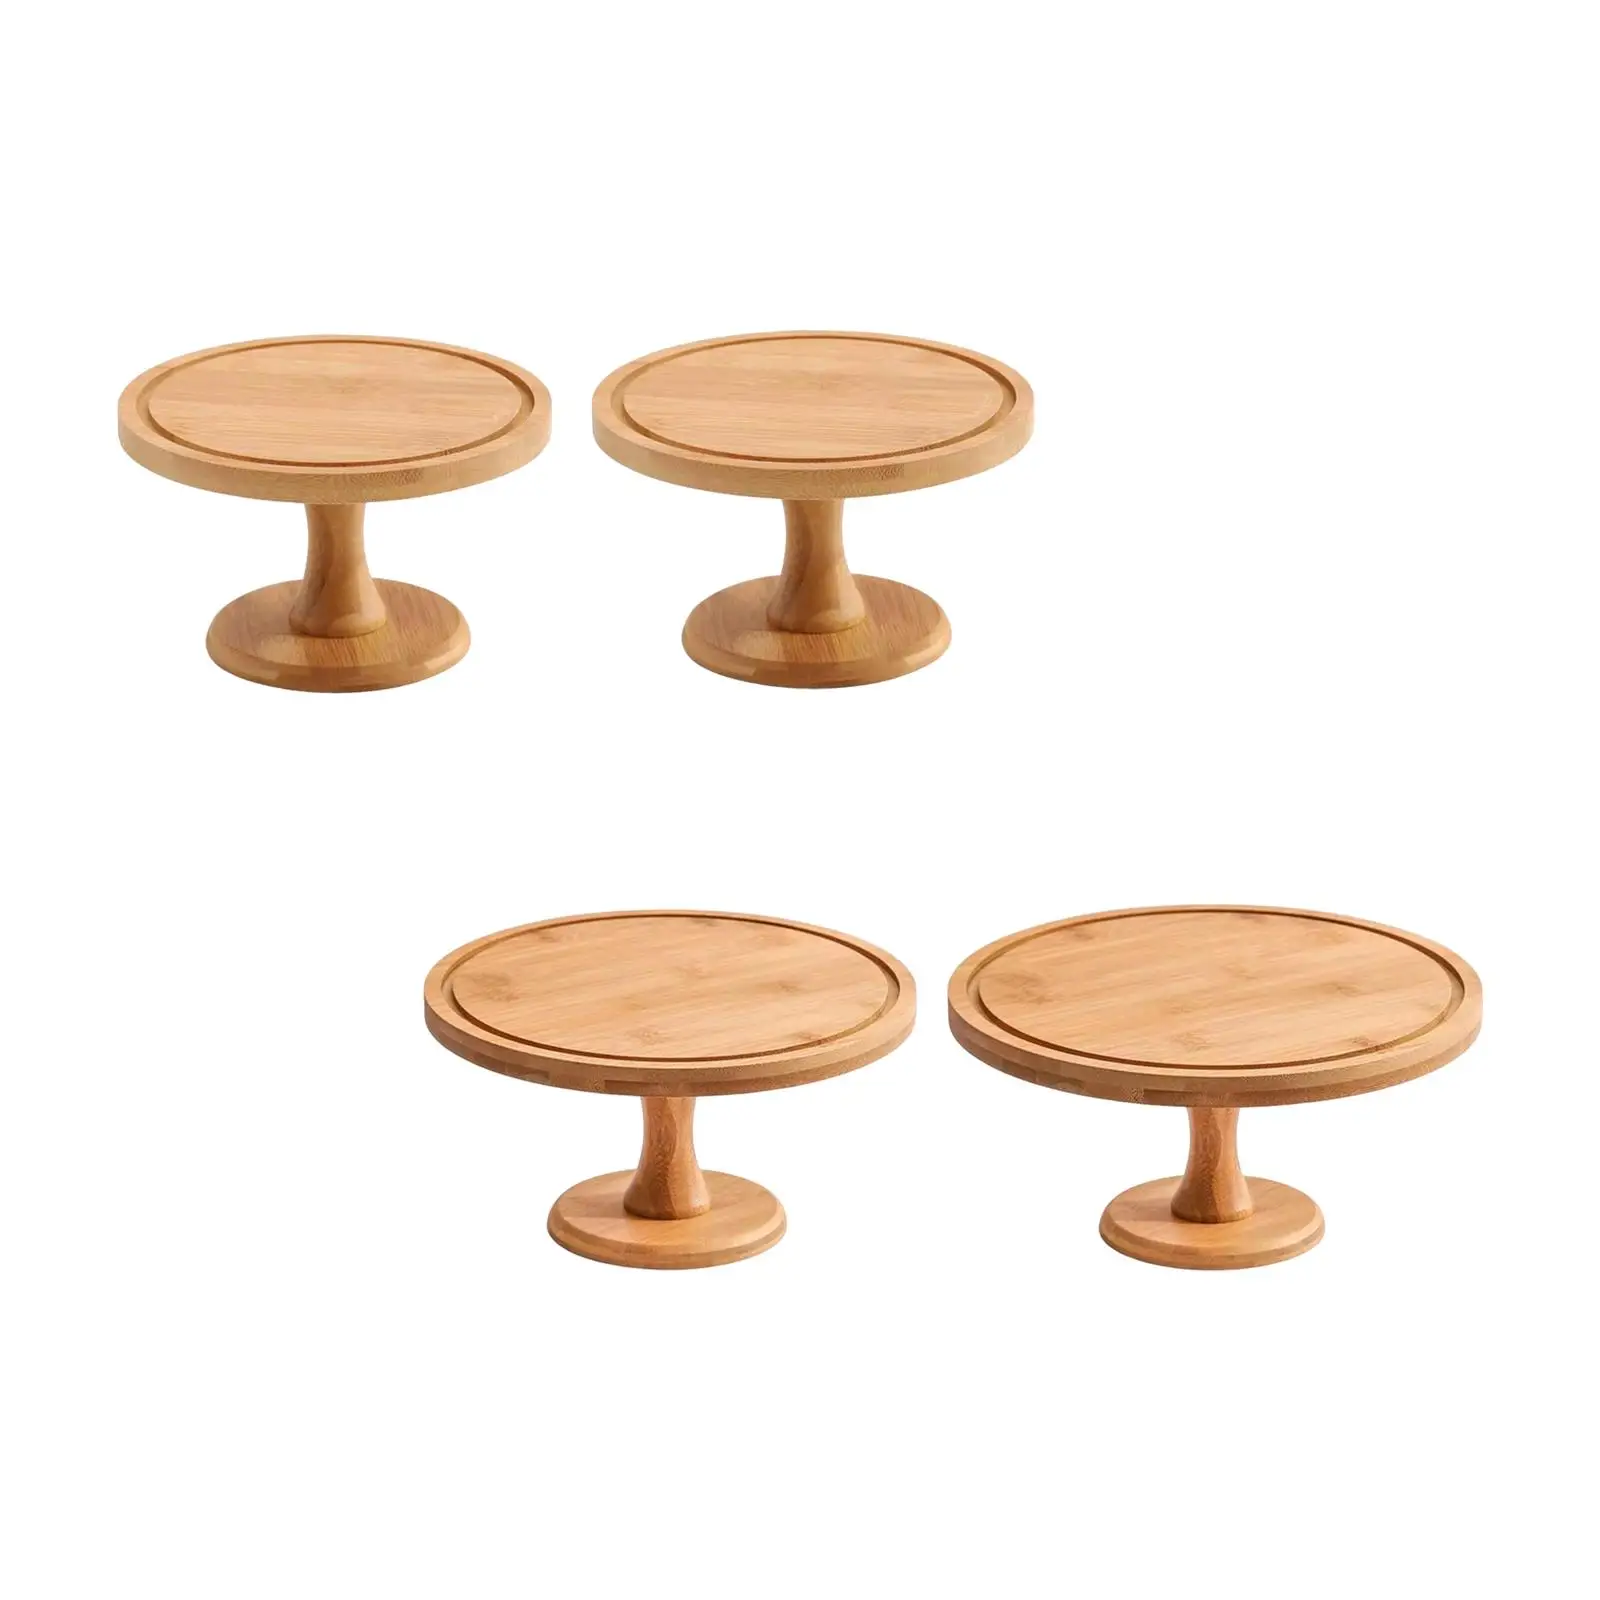 Bamboo Cake Stand Serving Tray Appetizers Fruit Holders Serving Platter Multiuse Round for Graduation Table Centerpiece Wedding